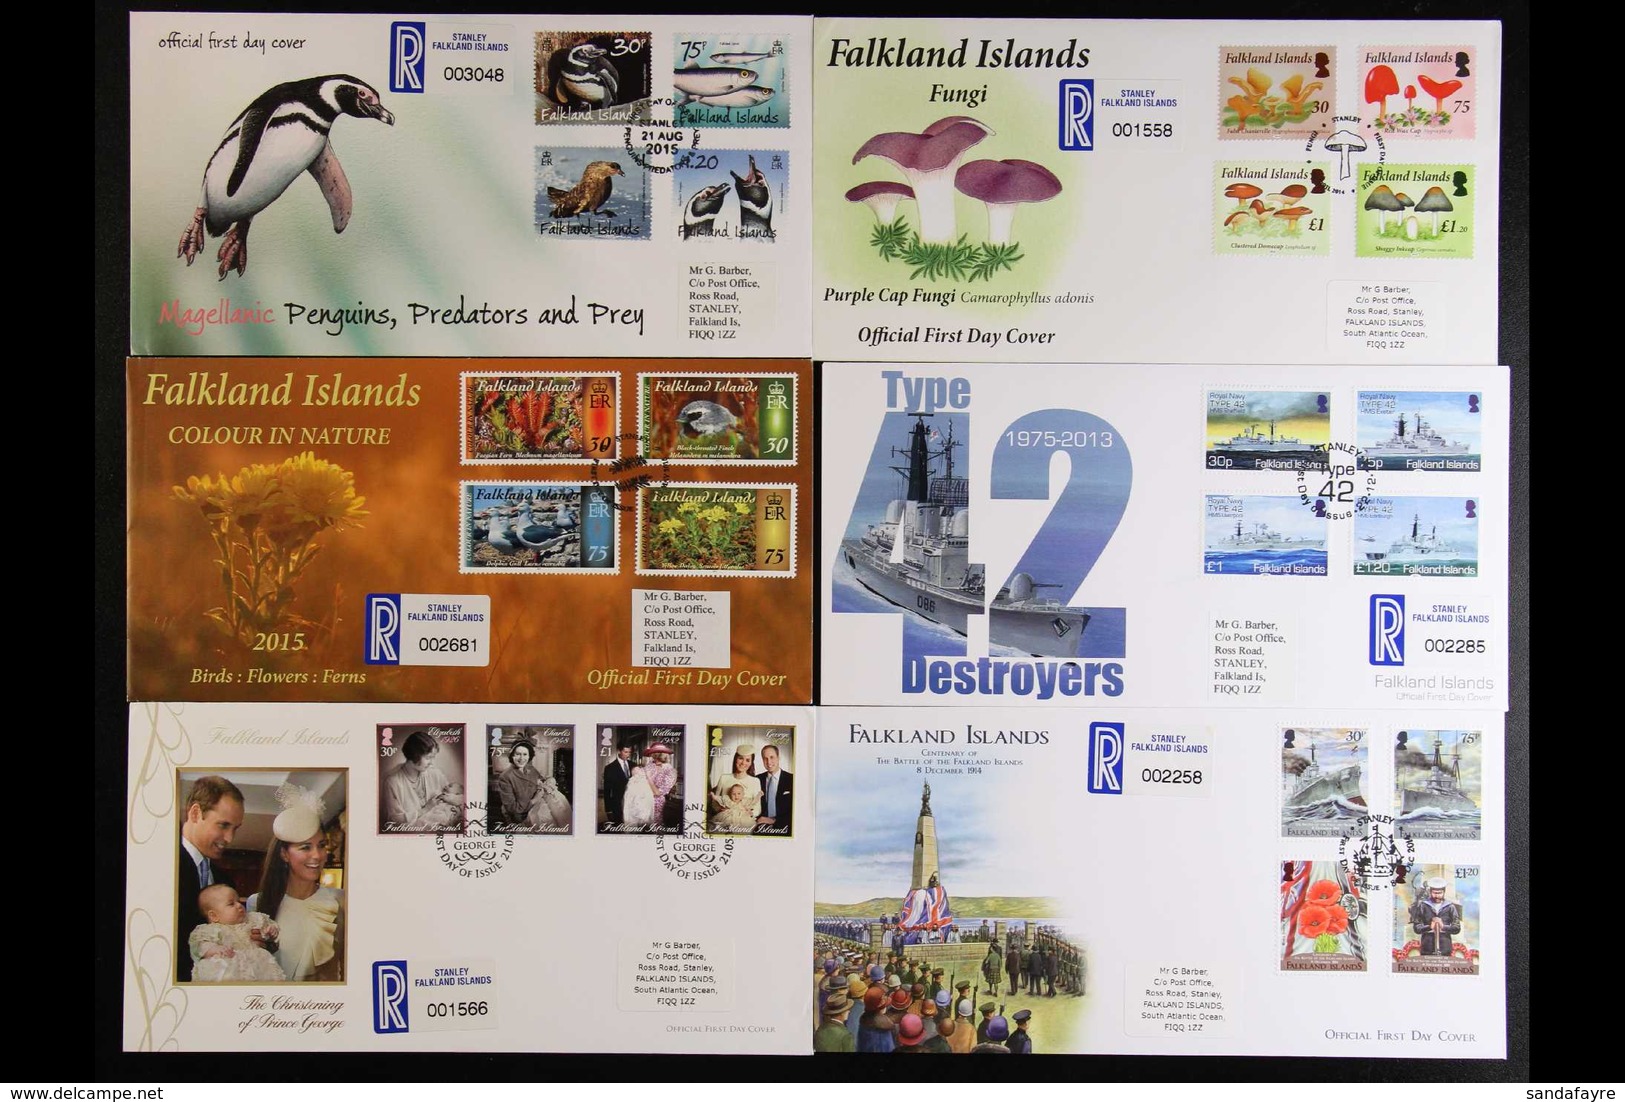 2013-2015 FIRST DAY COVER SELECTION All Different Illustrated Fdc's, Inc 2013 Colour In Nature Set And Shallow Marine Su - Falkland